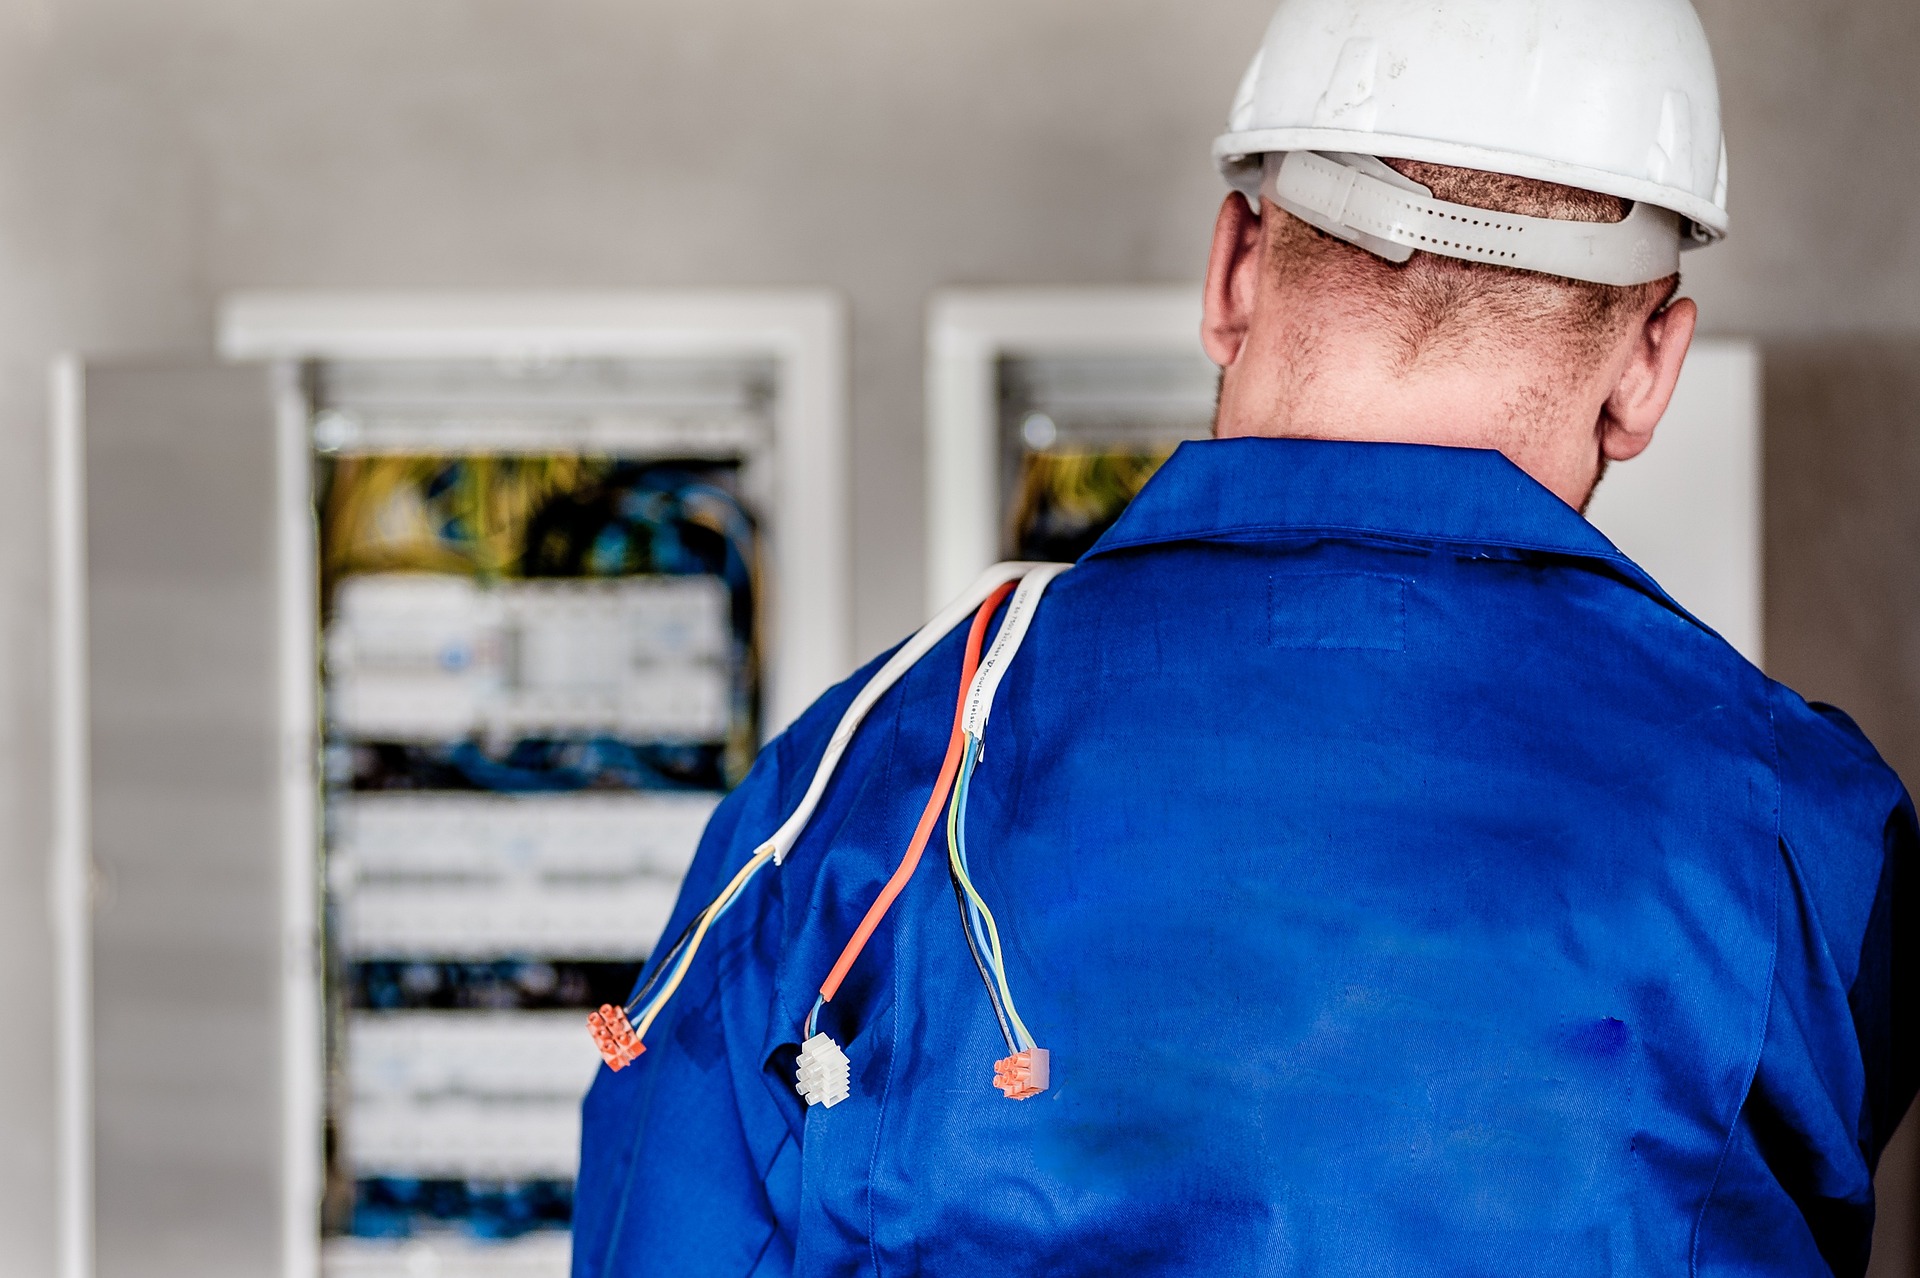 4 Signs you Need to Call your Electrician Immediately